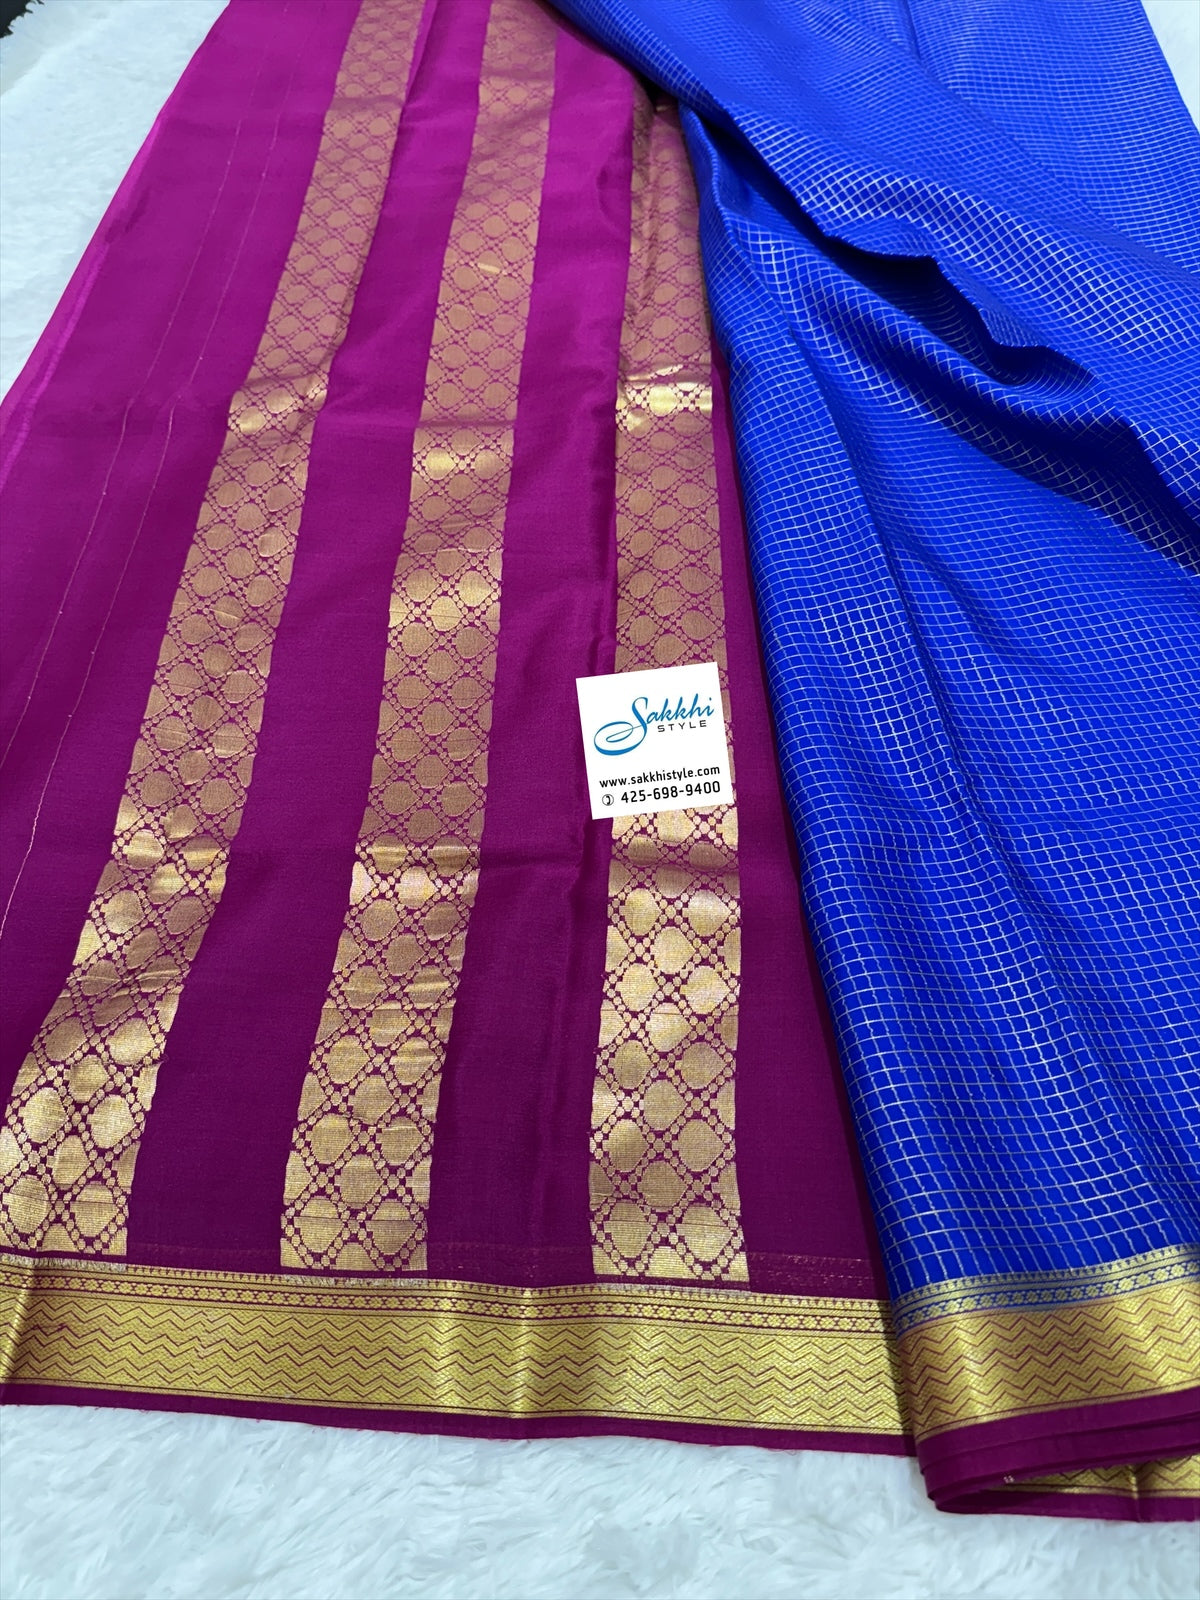 PURE MYSORE SILK SAREE IN BLEND OF ROYAL BLUE AND PURPLE HUES